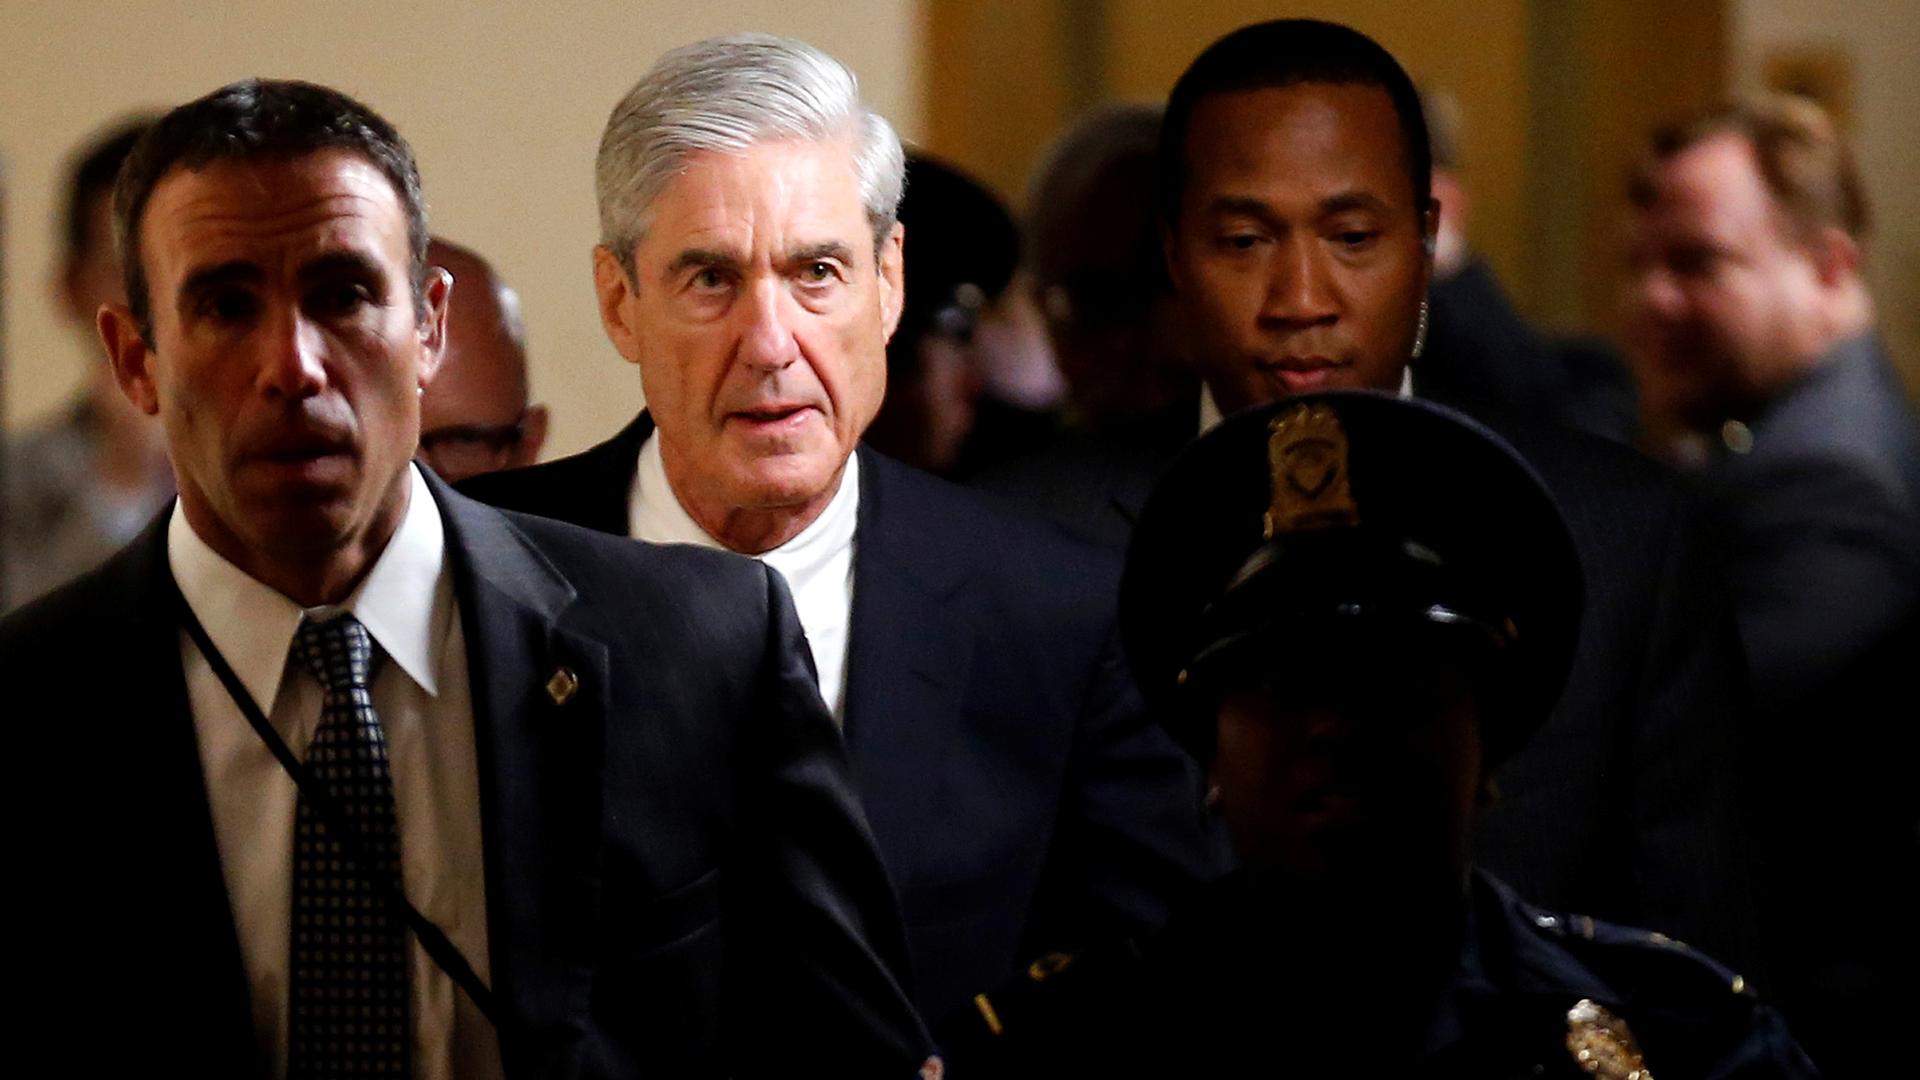 Special Counsel Robert Mueller is shown walking down a hallway surrounded by staff and police.